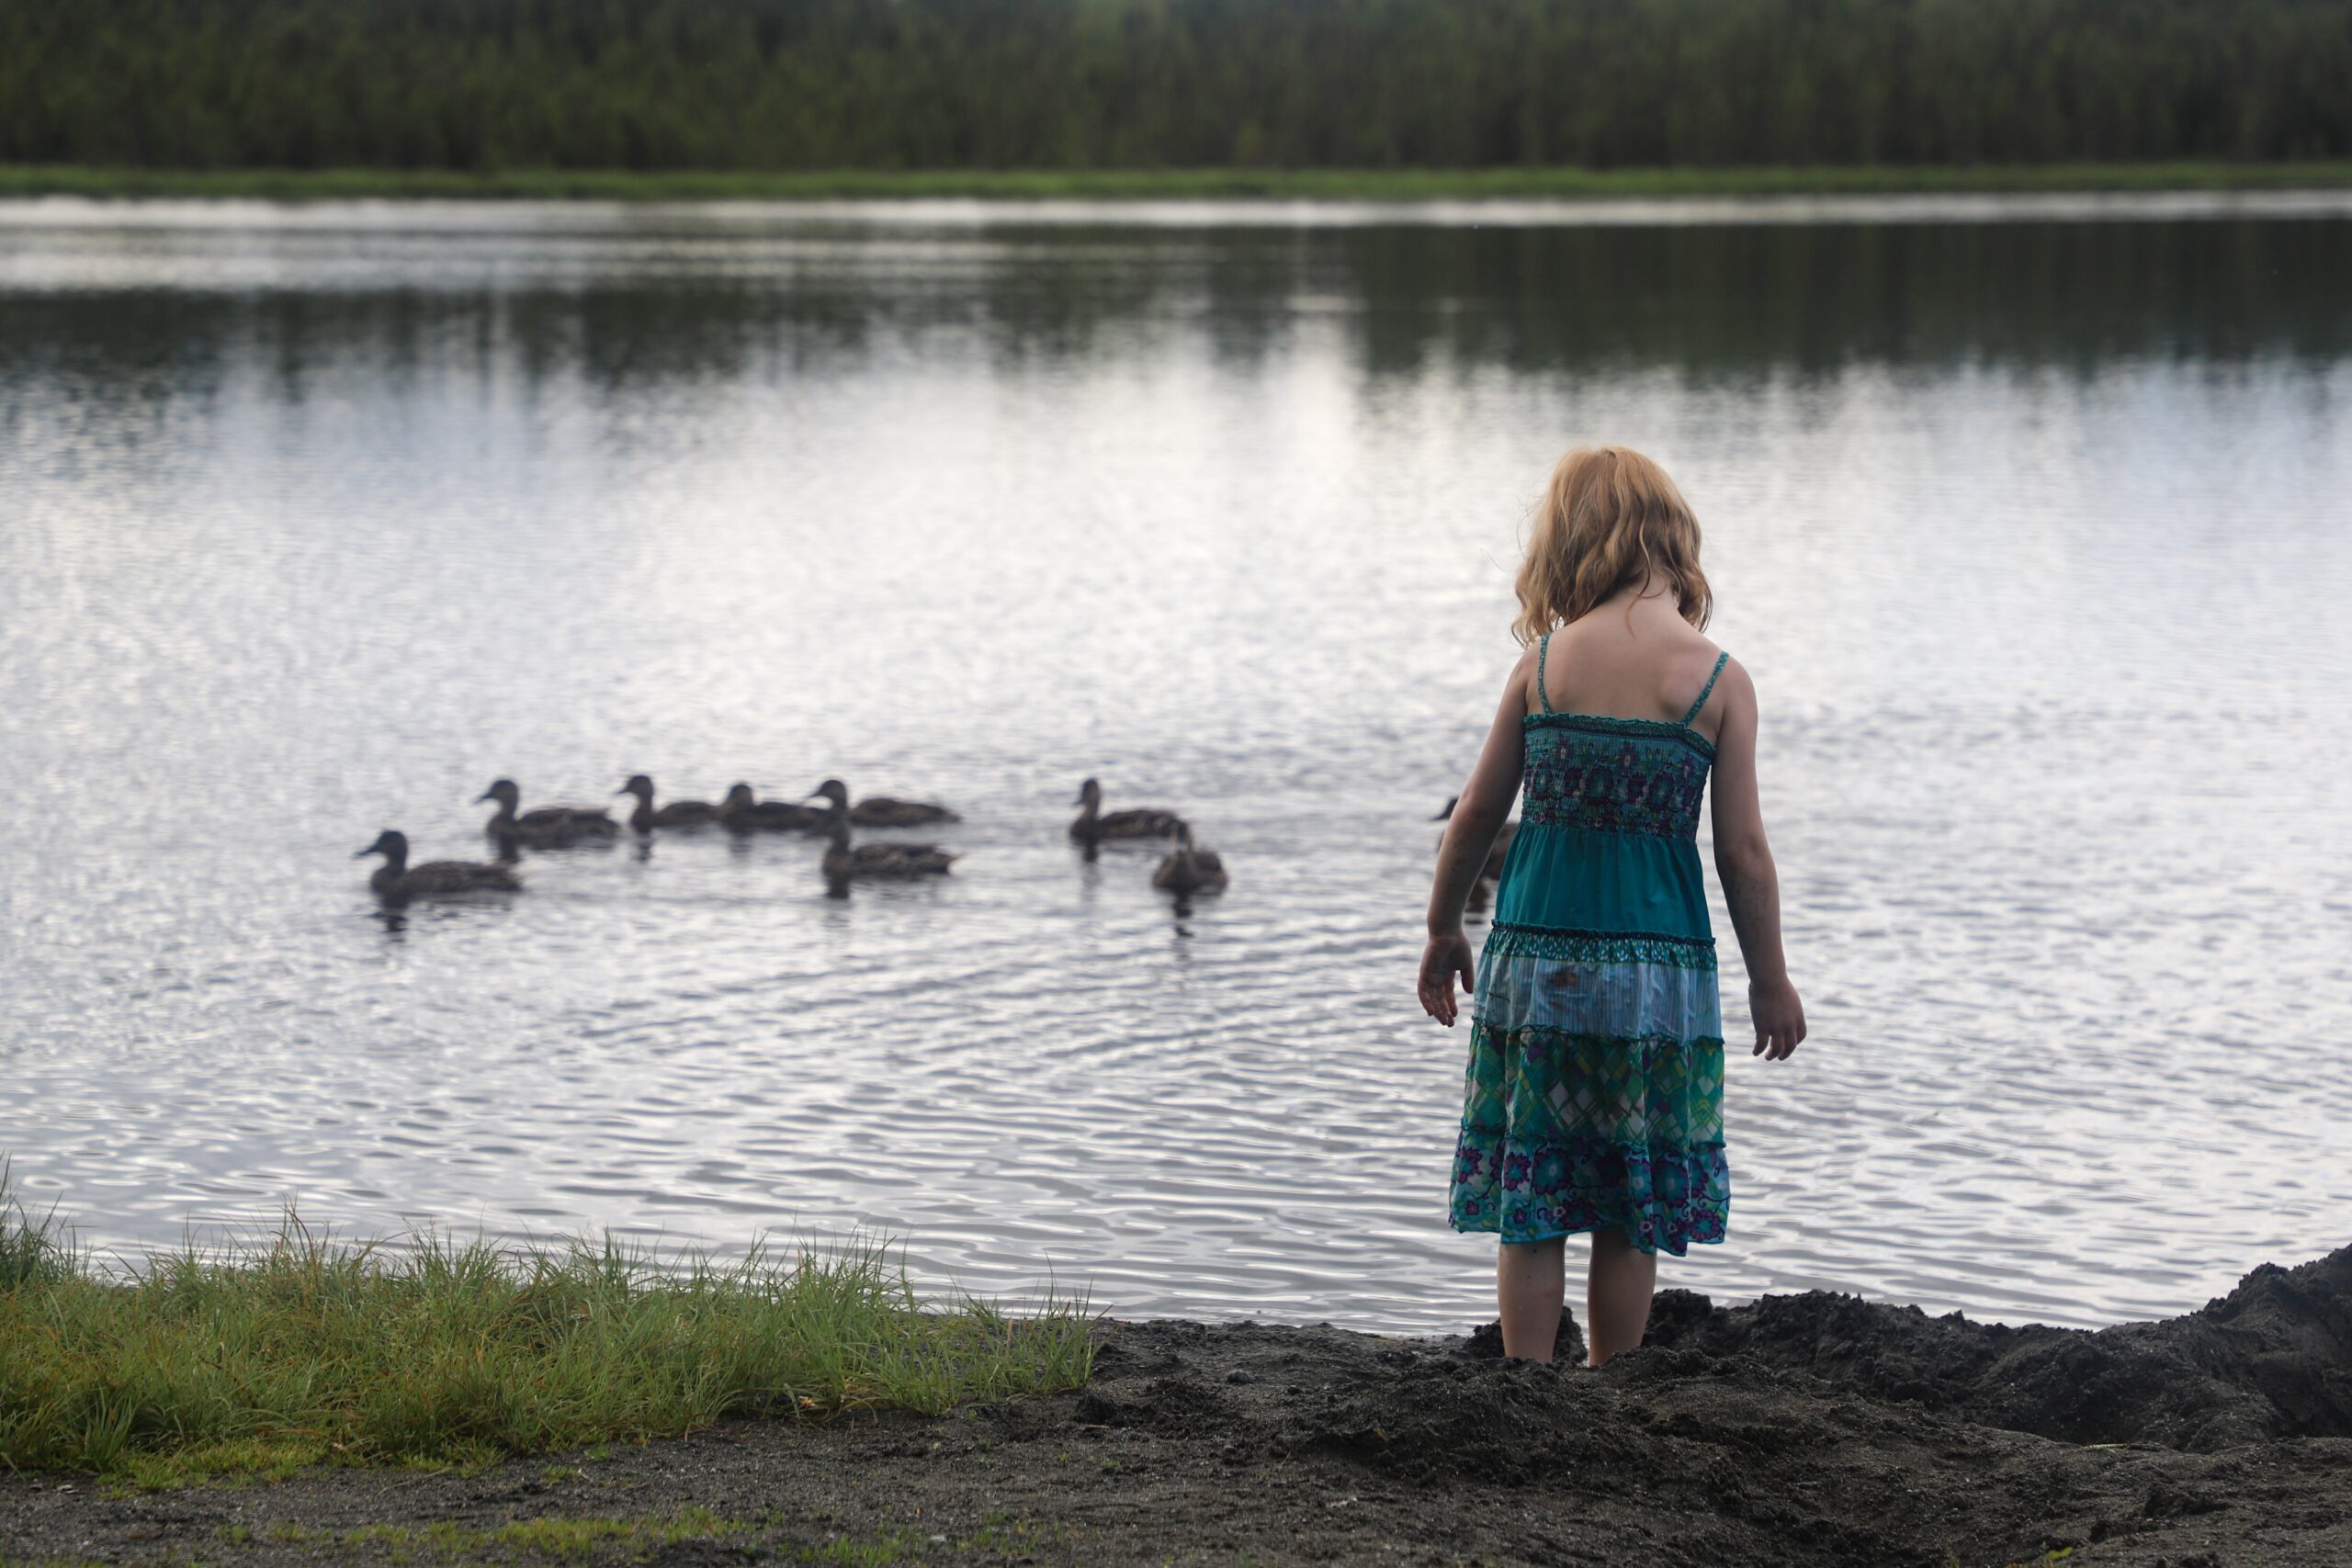 a girl standing at the edge of a lake with ducks swimming nearby